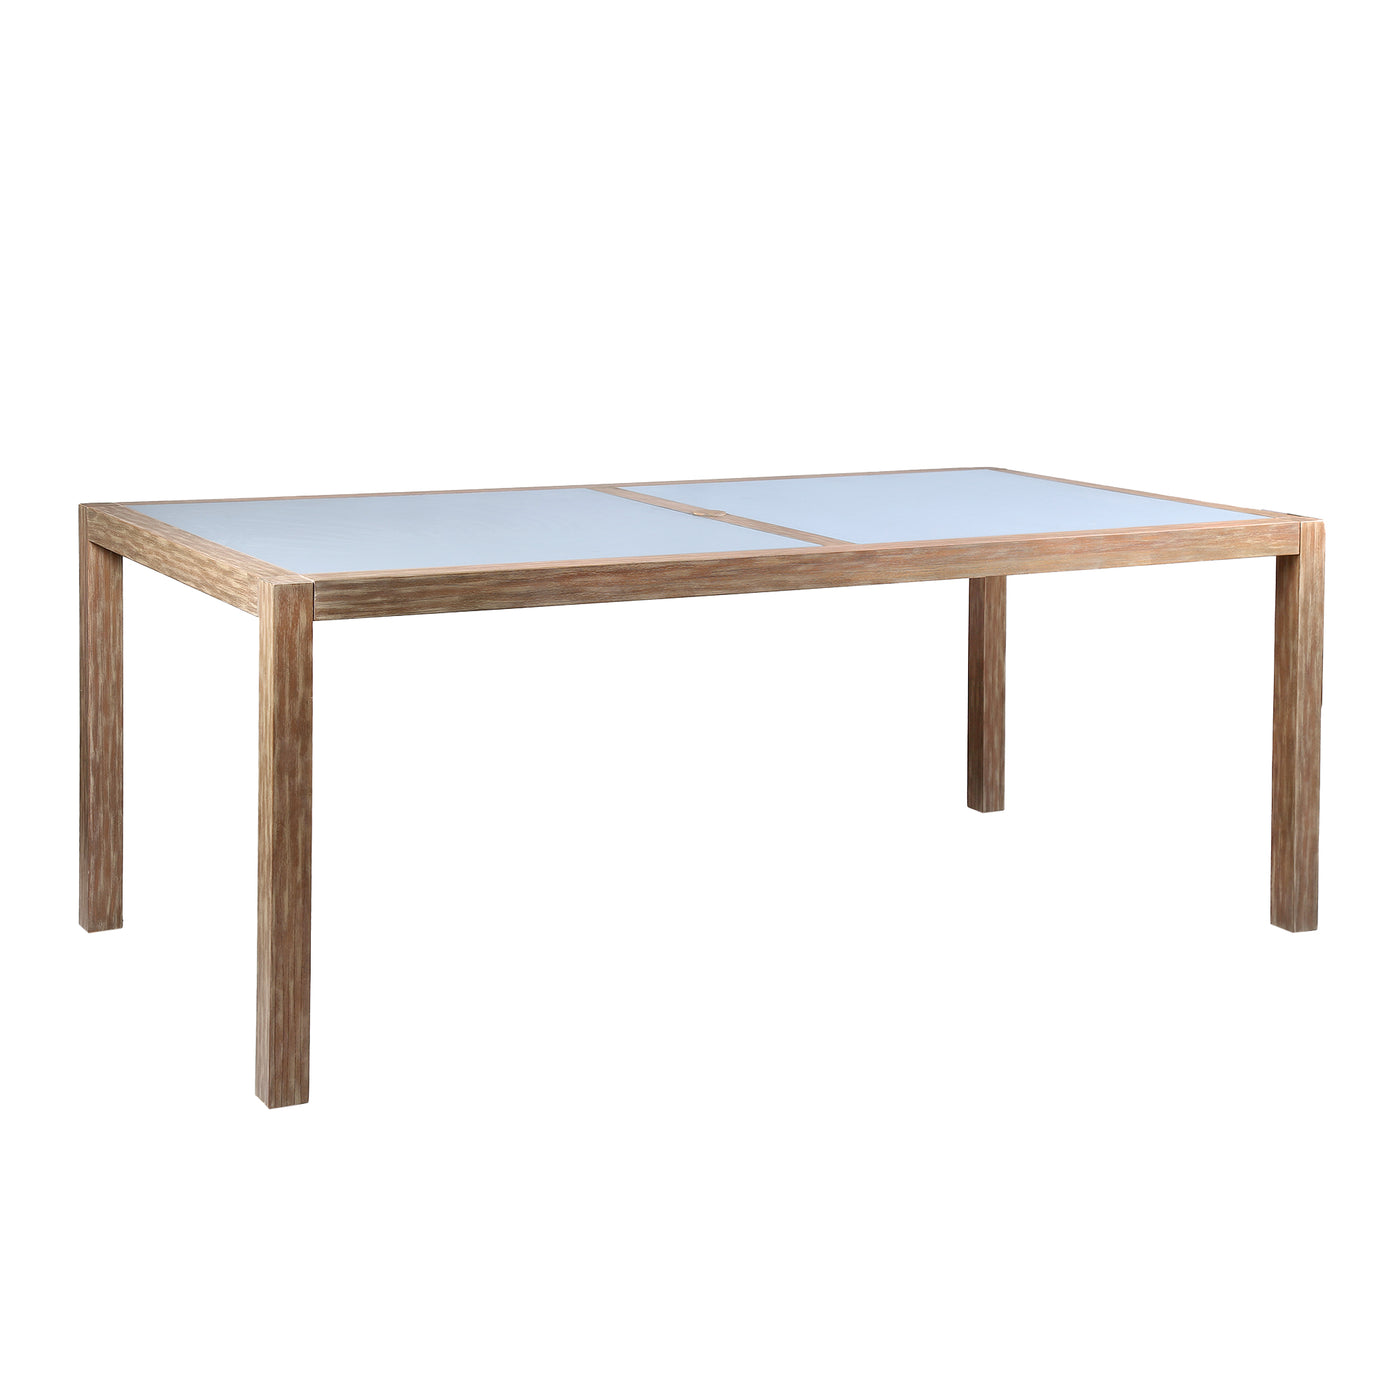 Sienna Outdoor Dining Table